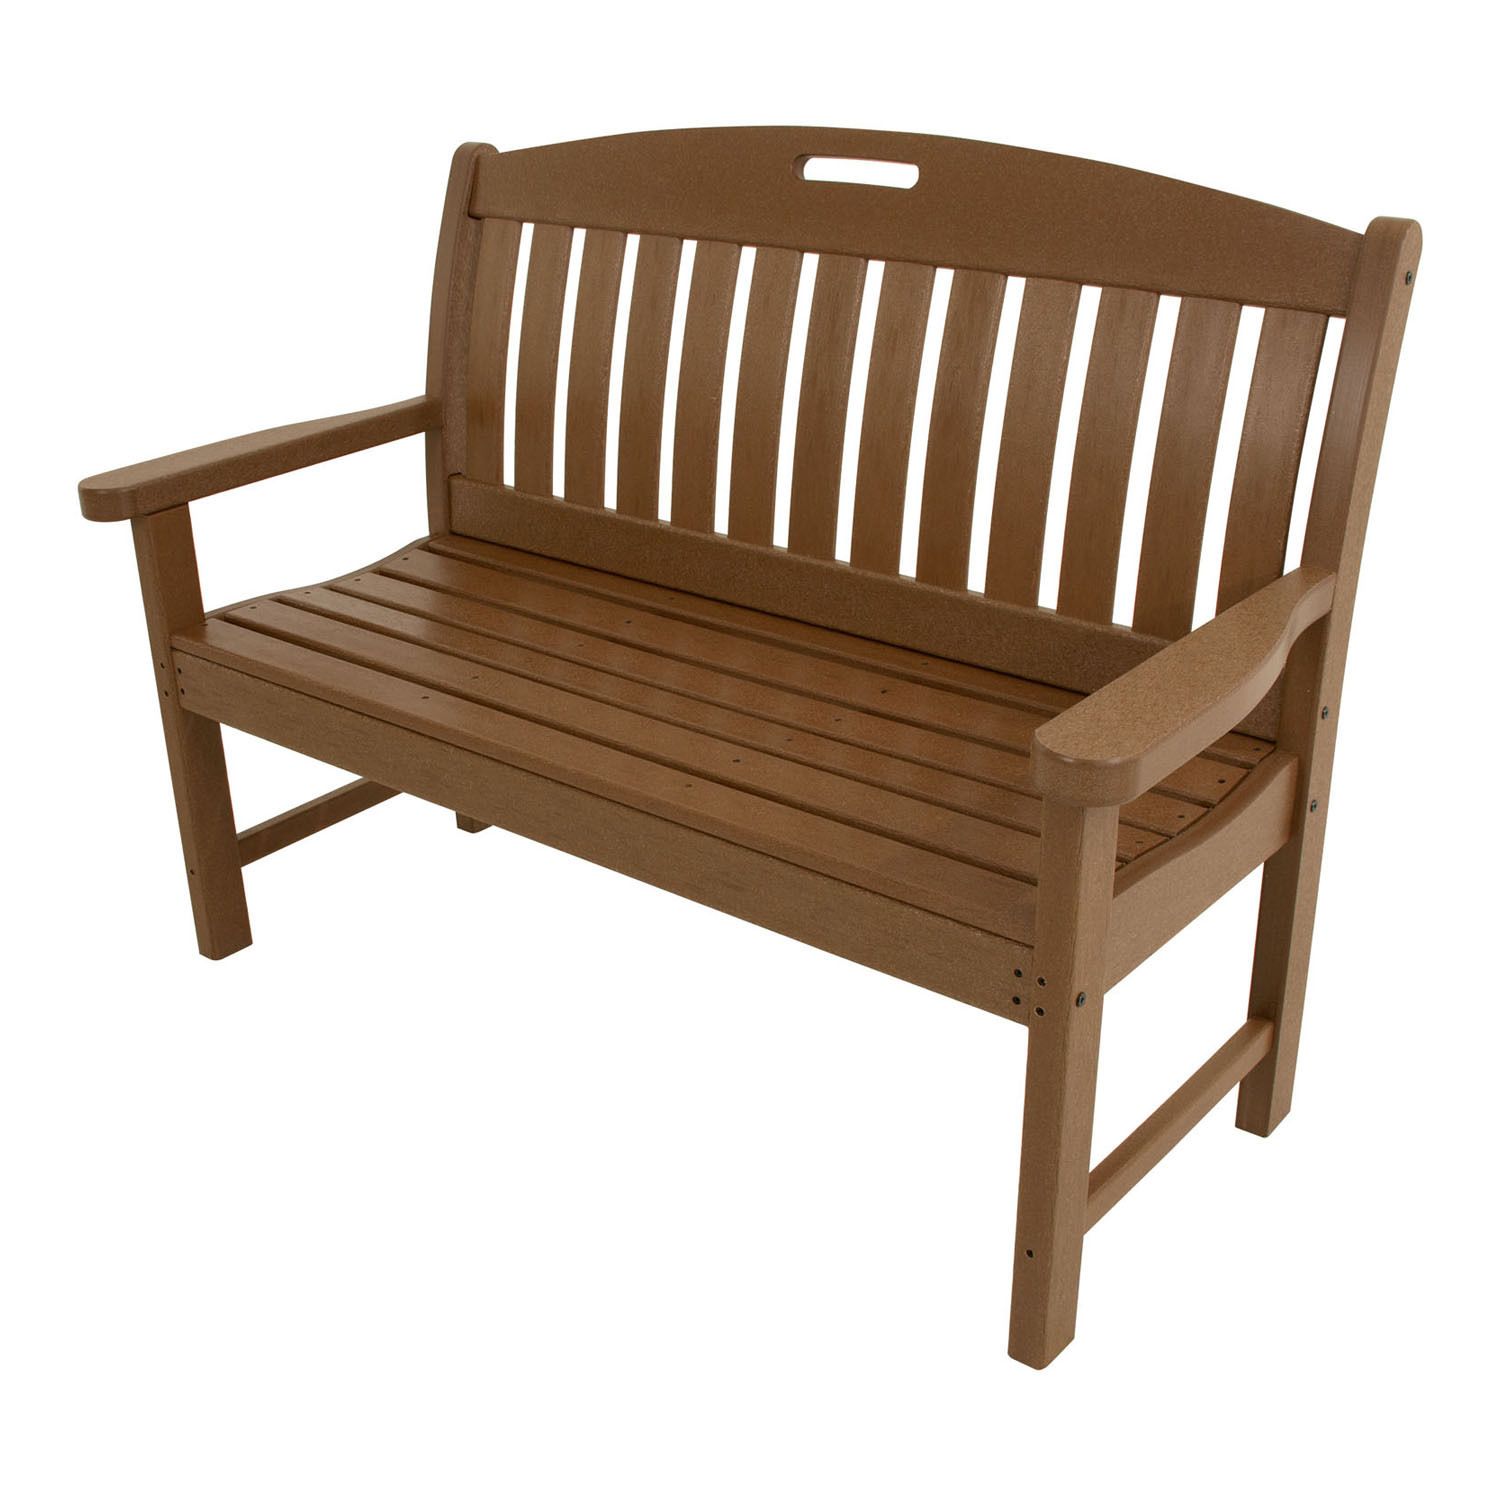 Image for Hanover Accessories Avalon All-Weather Porch Bench at Kohl's.